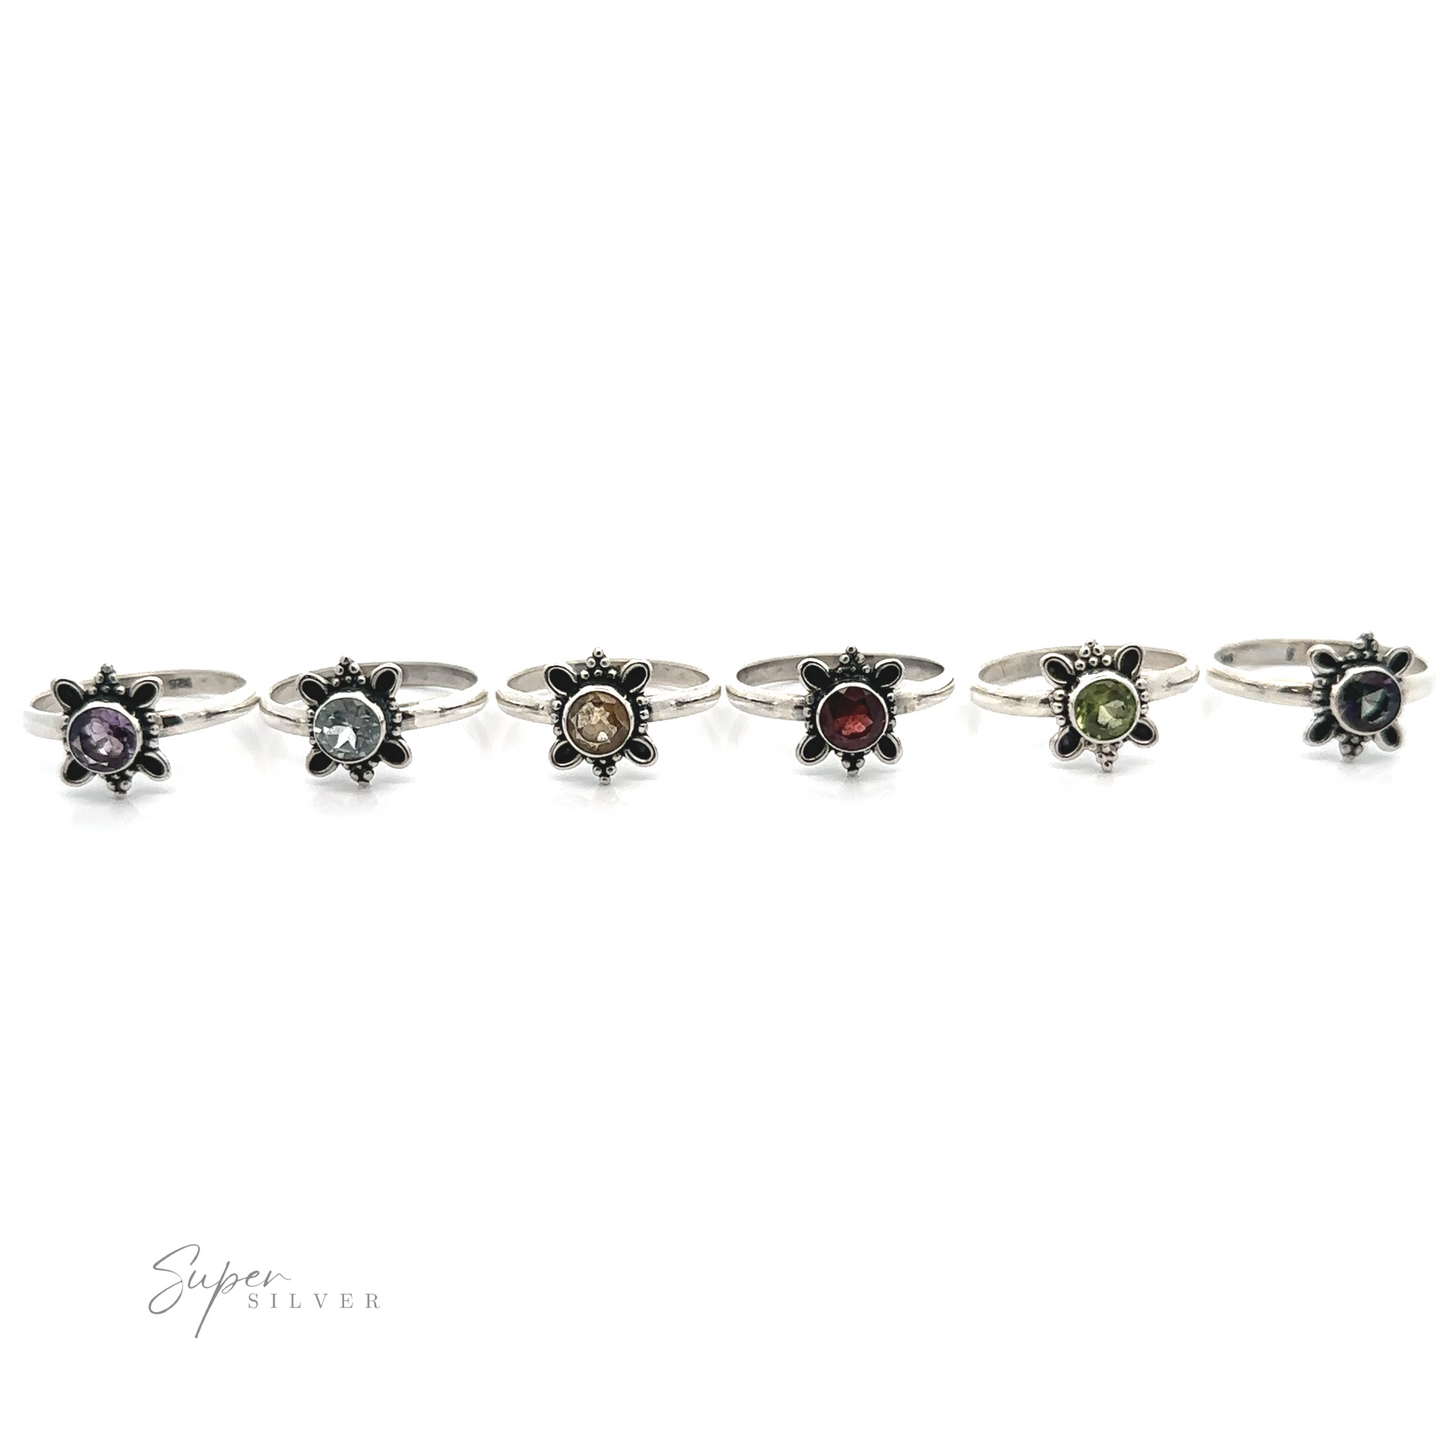 
                  
                    A collection of sterling silver Round Faceted Gemstone Rings with various colored gemstones displayed in a row on a white background.
                  
                